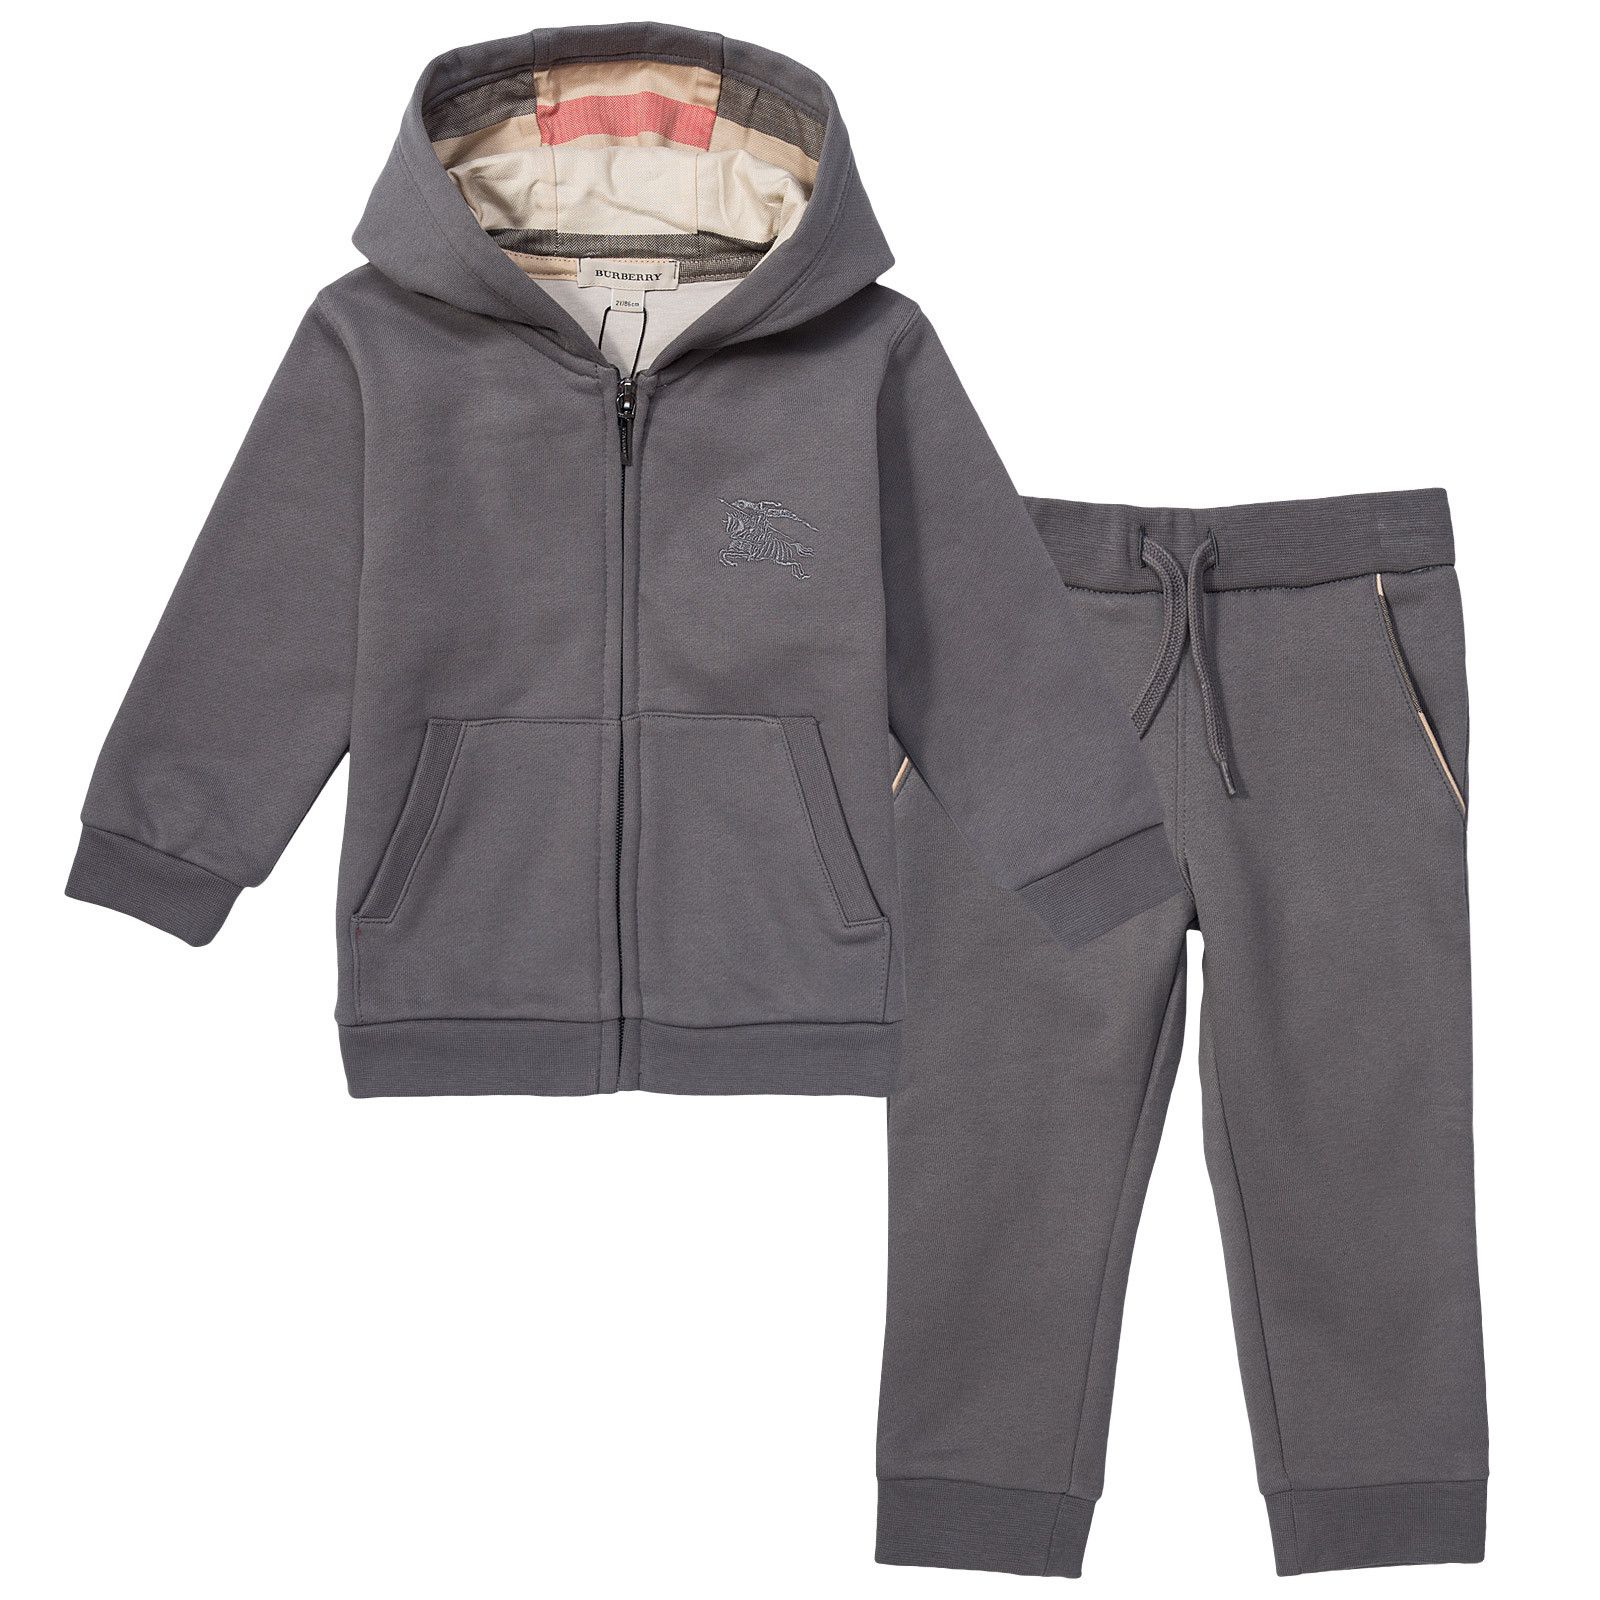 Boys Grey Tracksuit With Check Lined Hood - CÉMAROSE | Children's Fashion Store - 1